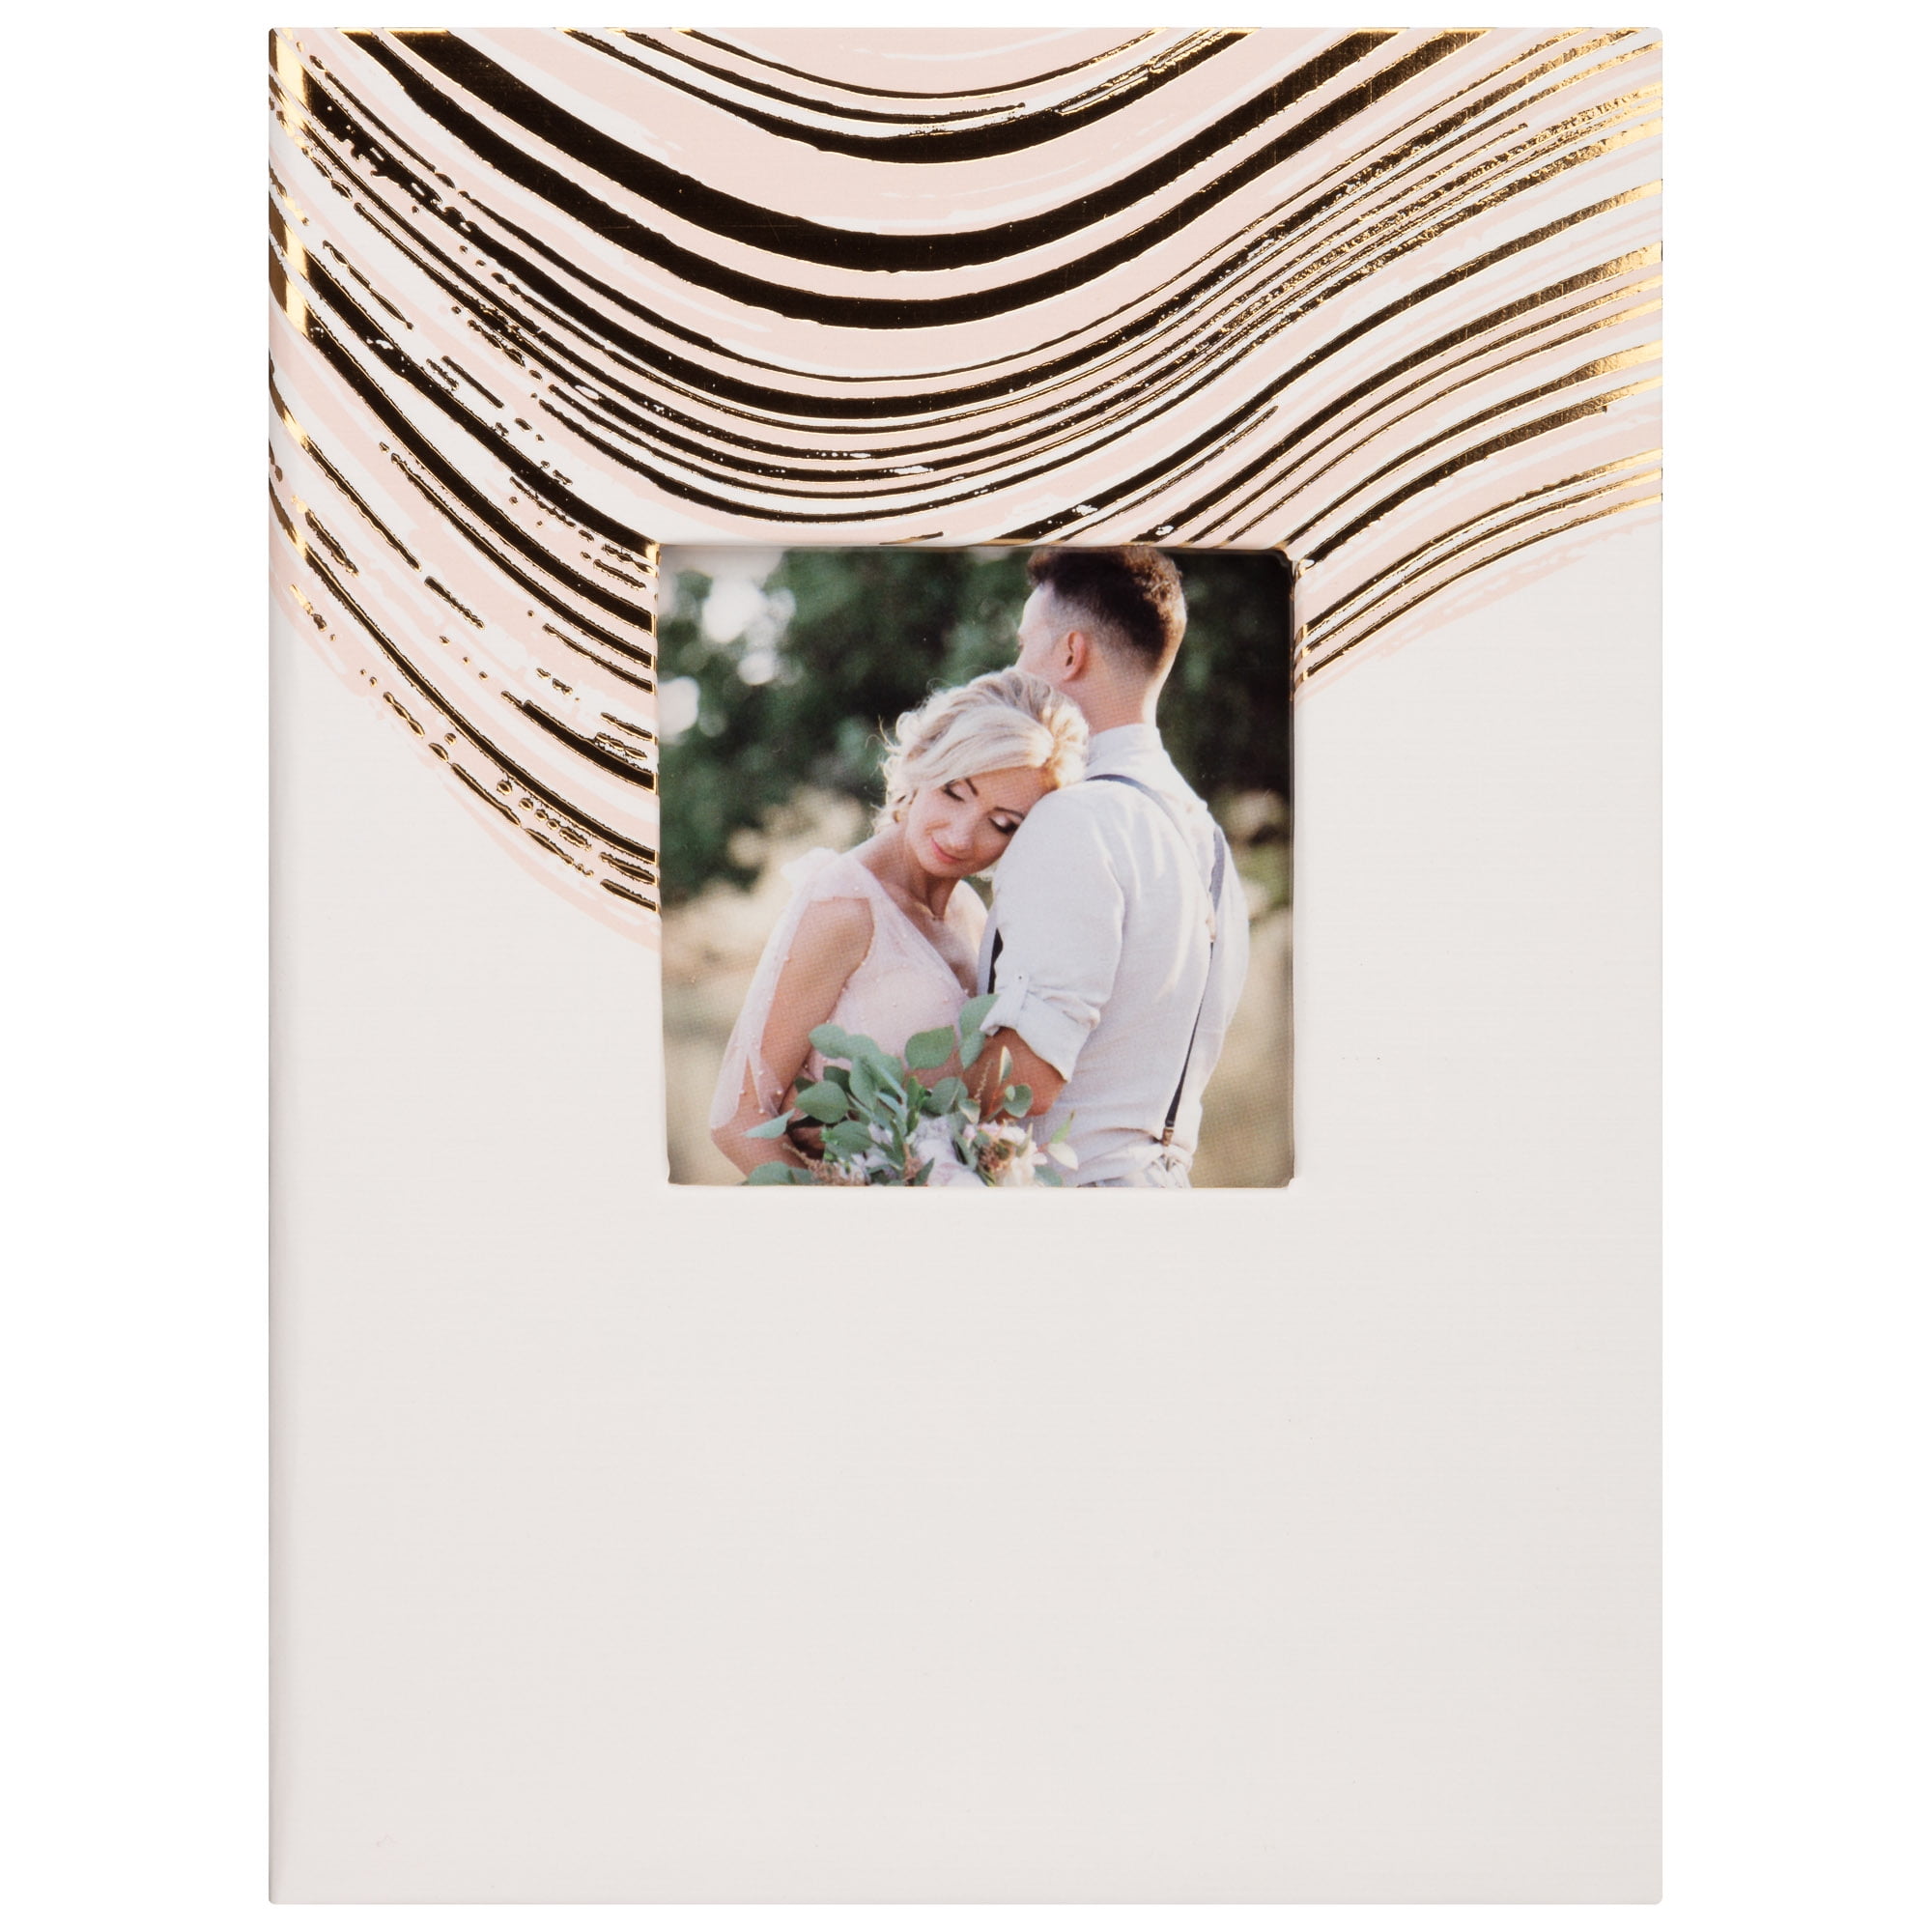 Pinnacle Ivory with Pink and Gold Rings Hard Brag Photo Album, 36 page count